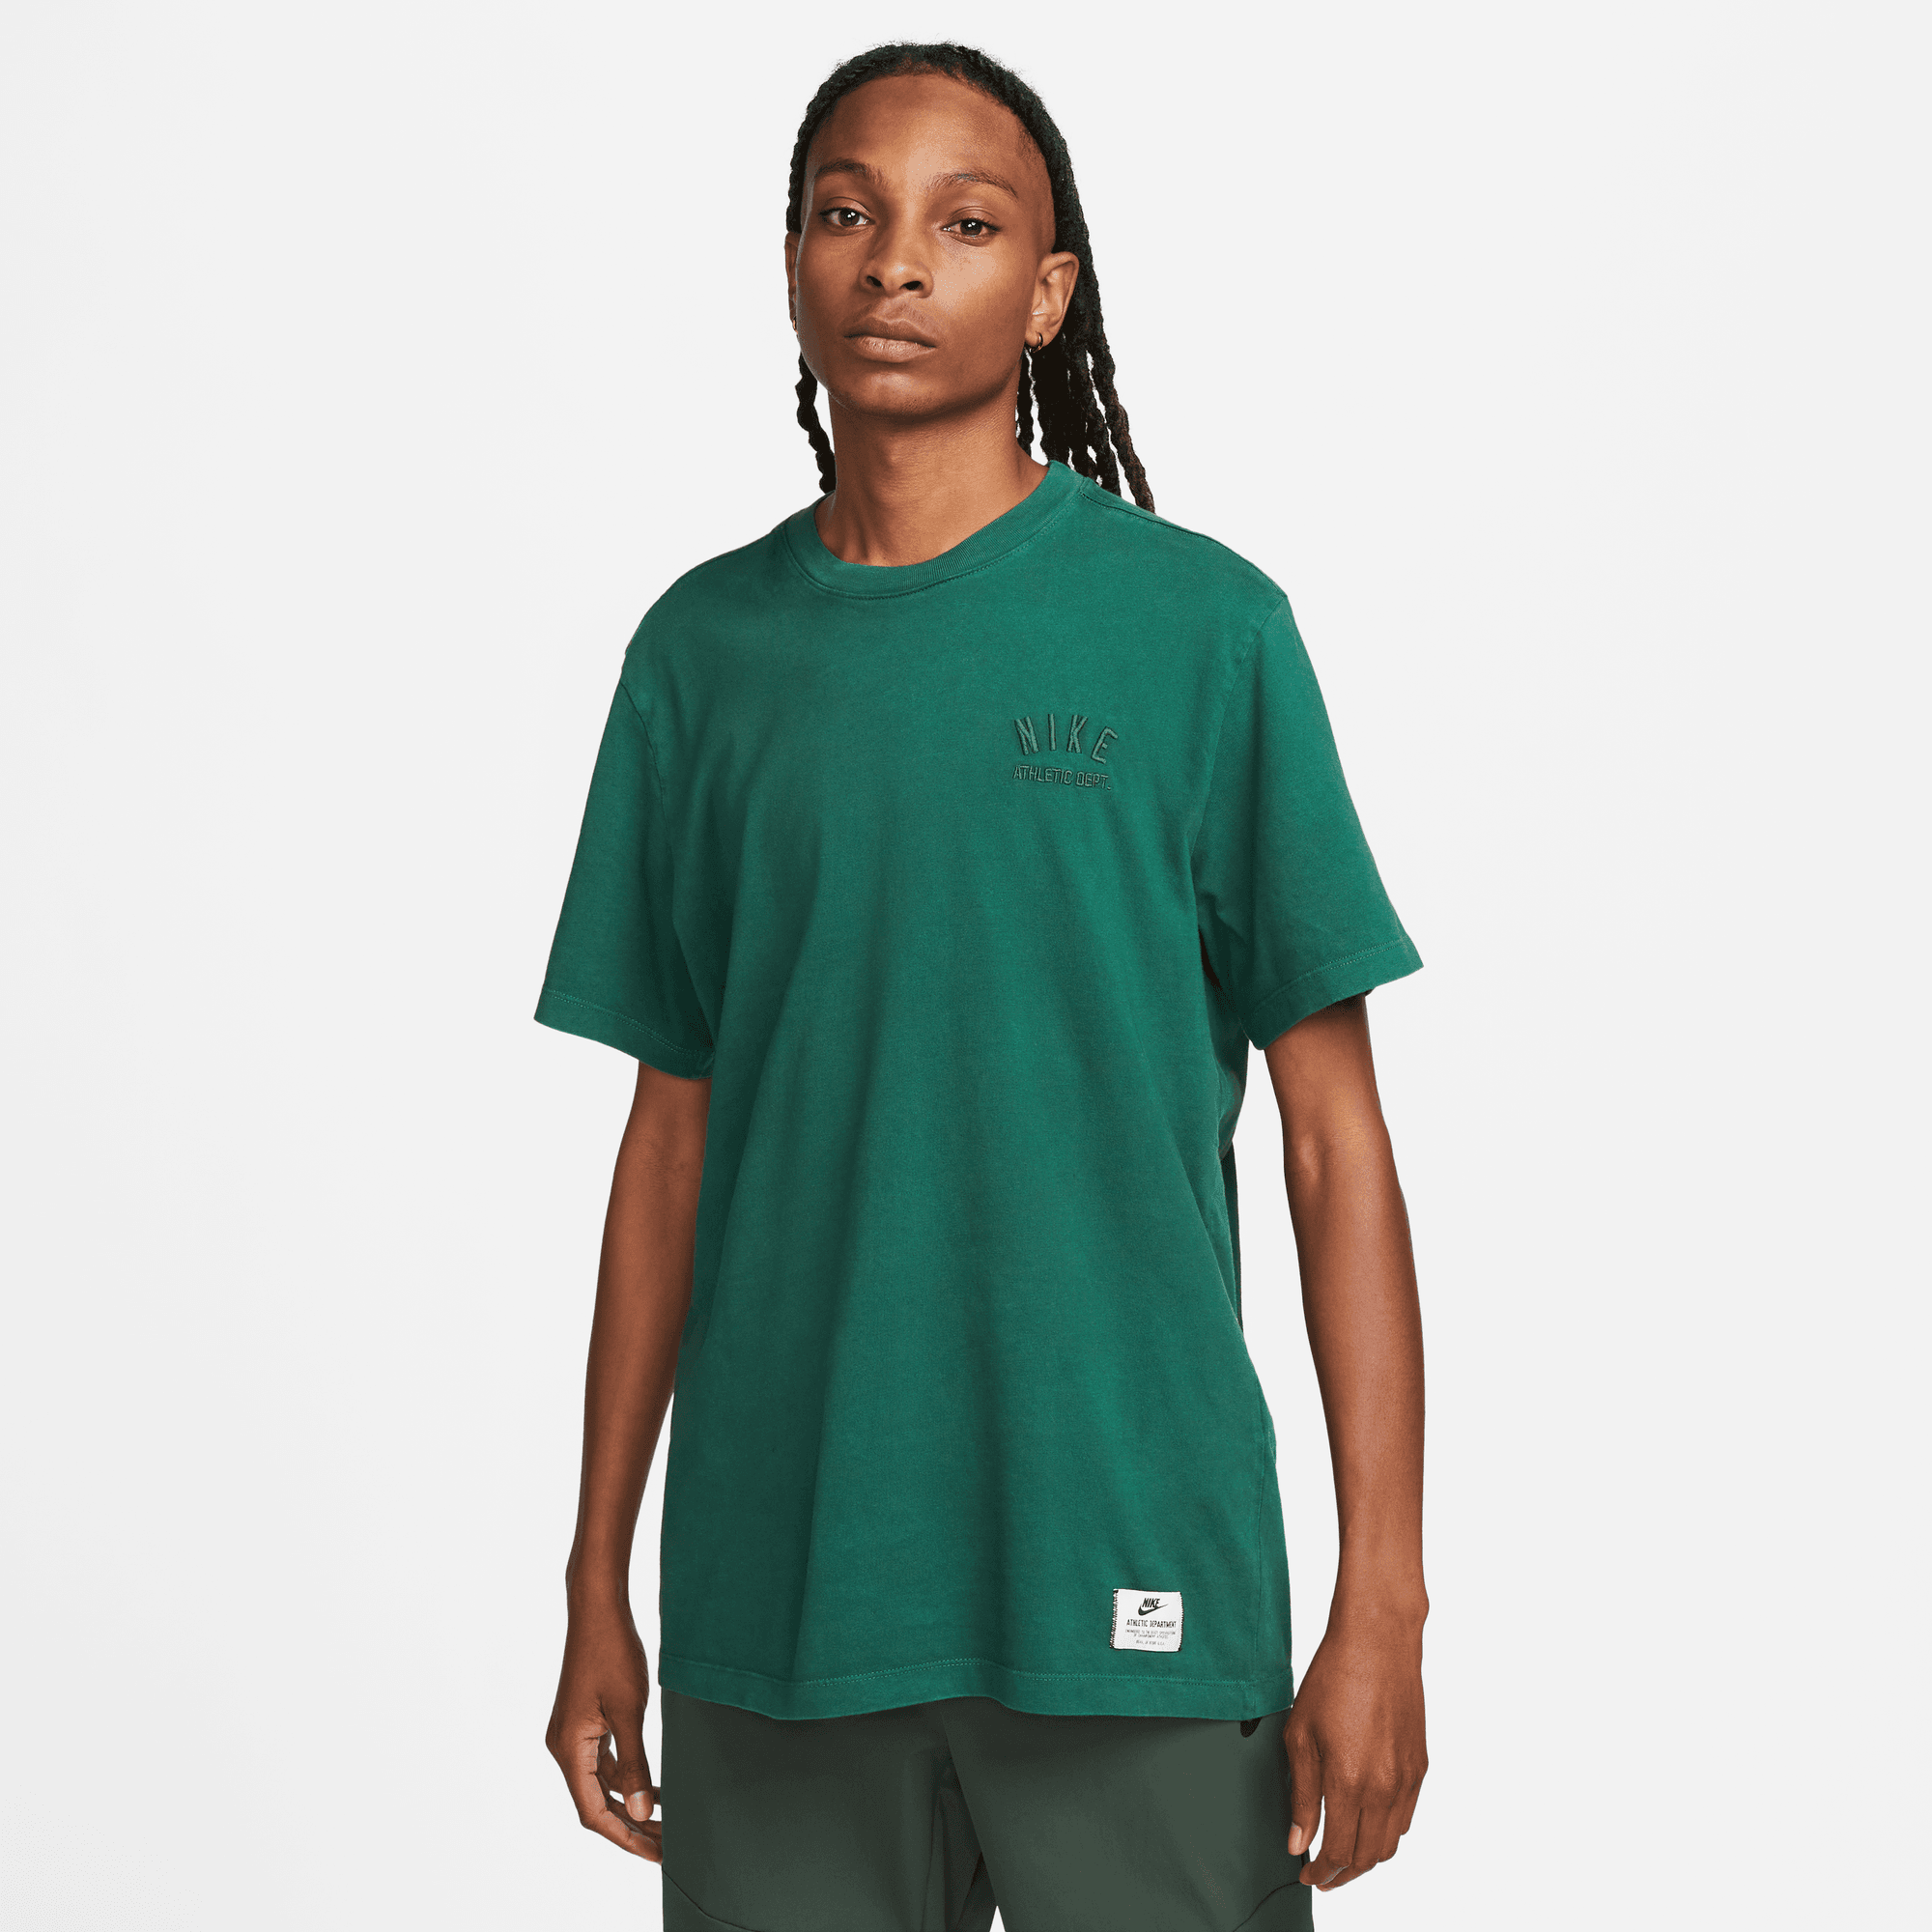 SS Nike T-Shirt Sports NSW Crafted | Champs